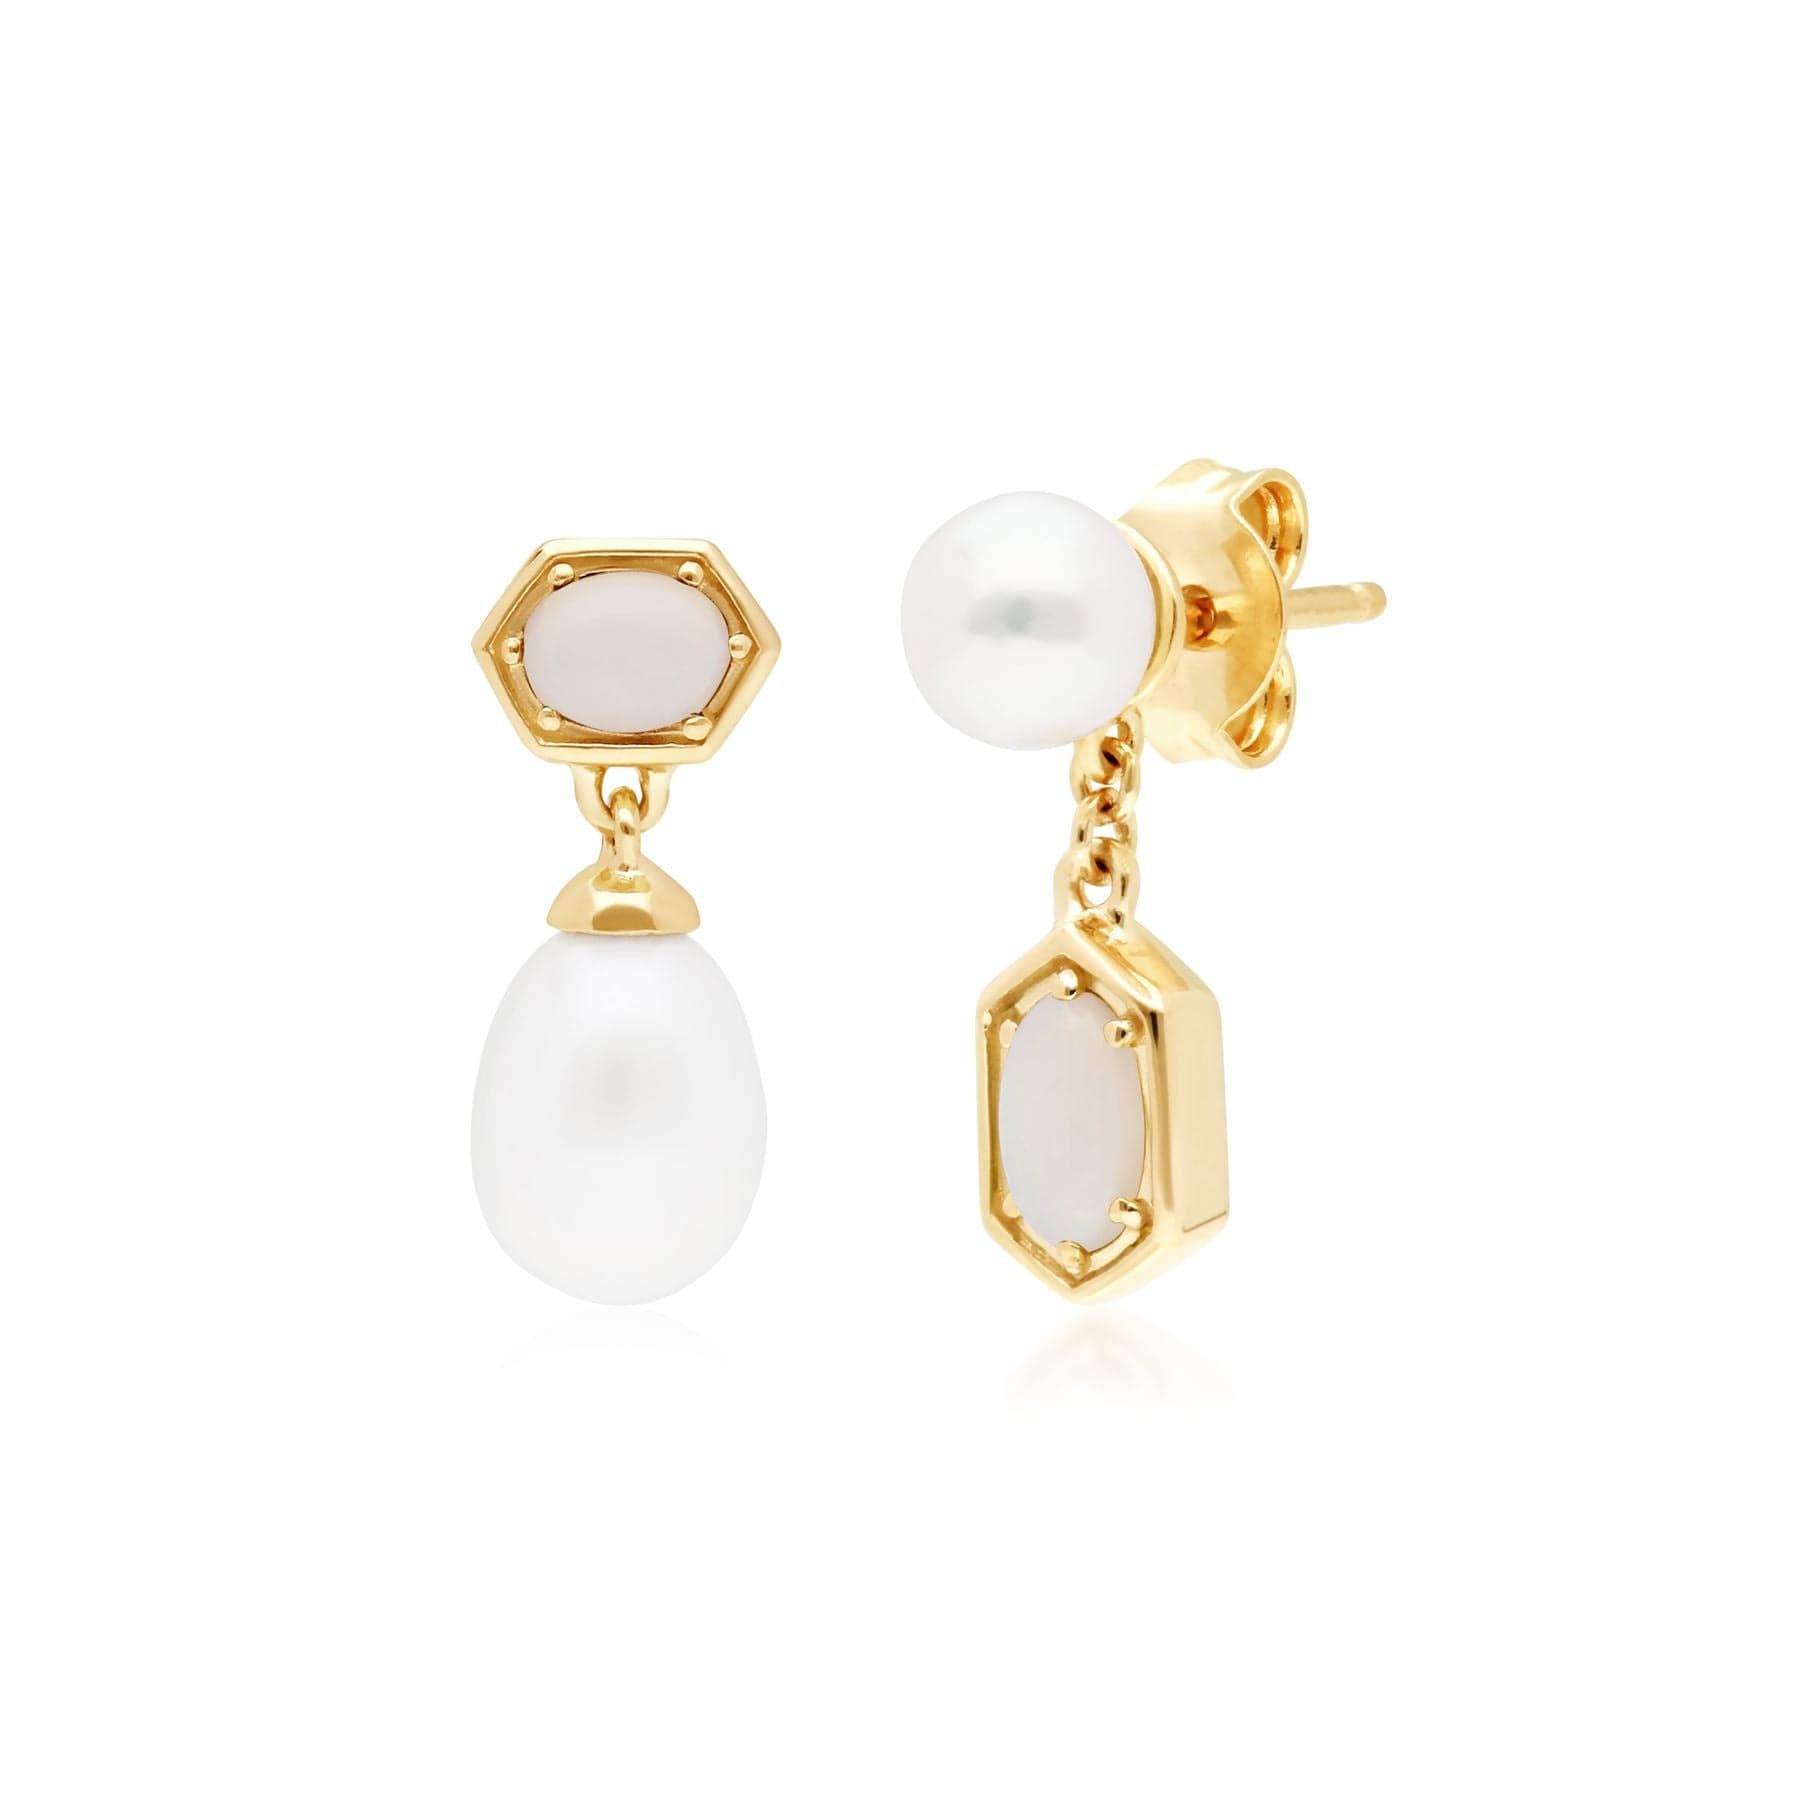 Modern Pearl & Opal Mismatched Drop Earrings in 9ct Yellow Gold